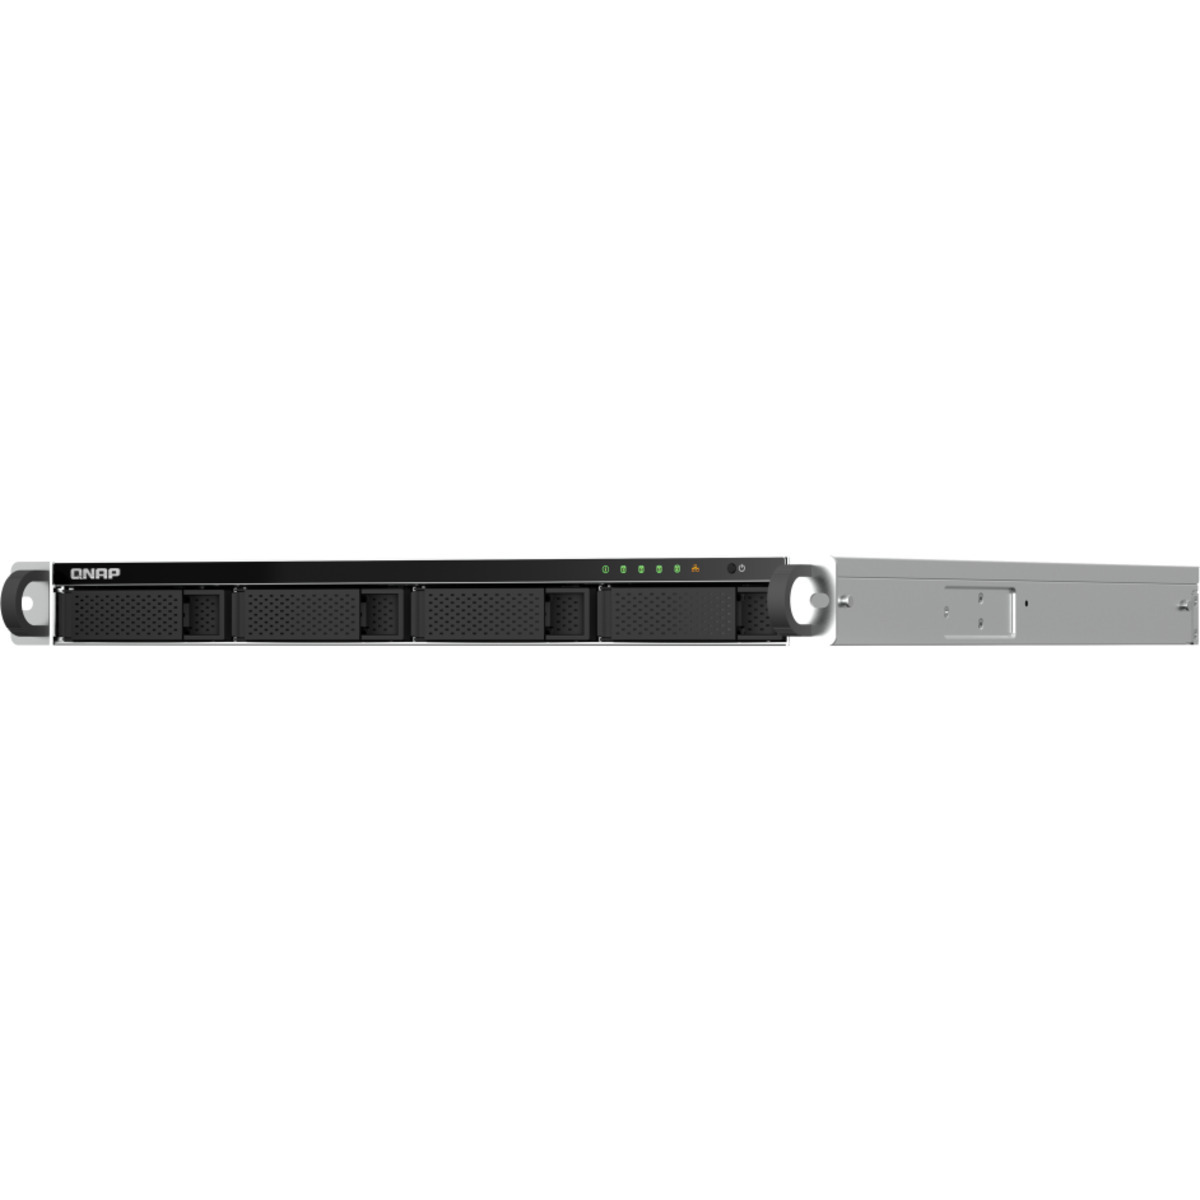 buy $2799 QNAP TS-464U-RP 48tb RackMount NAS - Network Attached Storage Device 4x12000gb Seagate IronWolf Pro ST12000NT001 3.5 7200rpm SATA 6Gb/s HDD NAS Class Drives Installed - Burn-In Tested - nas headquarters buy network attached storage server device das new raid-5 free shipping simply usa TS-464U-RP